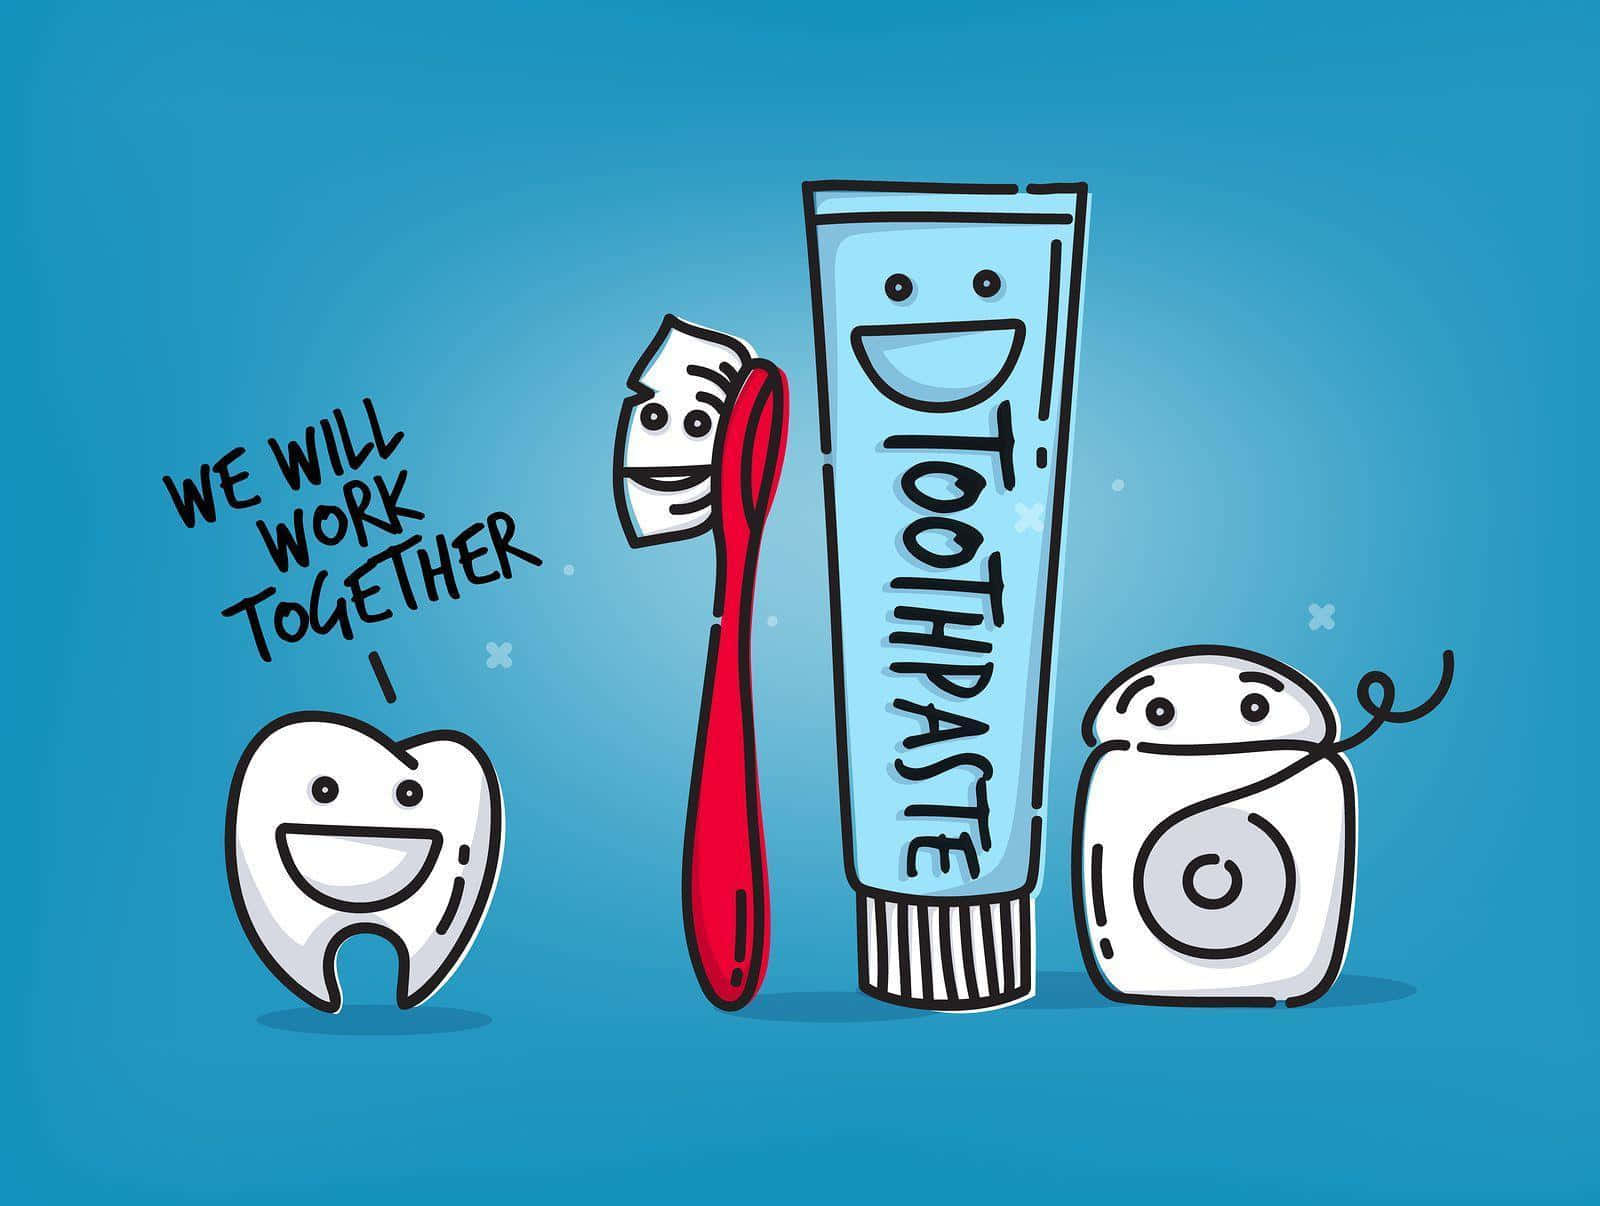 A Cartoon Illustration Of A Toothbrush And Toothpaste